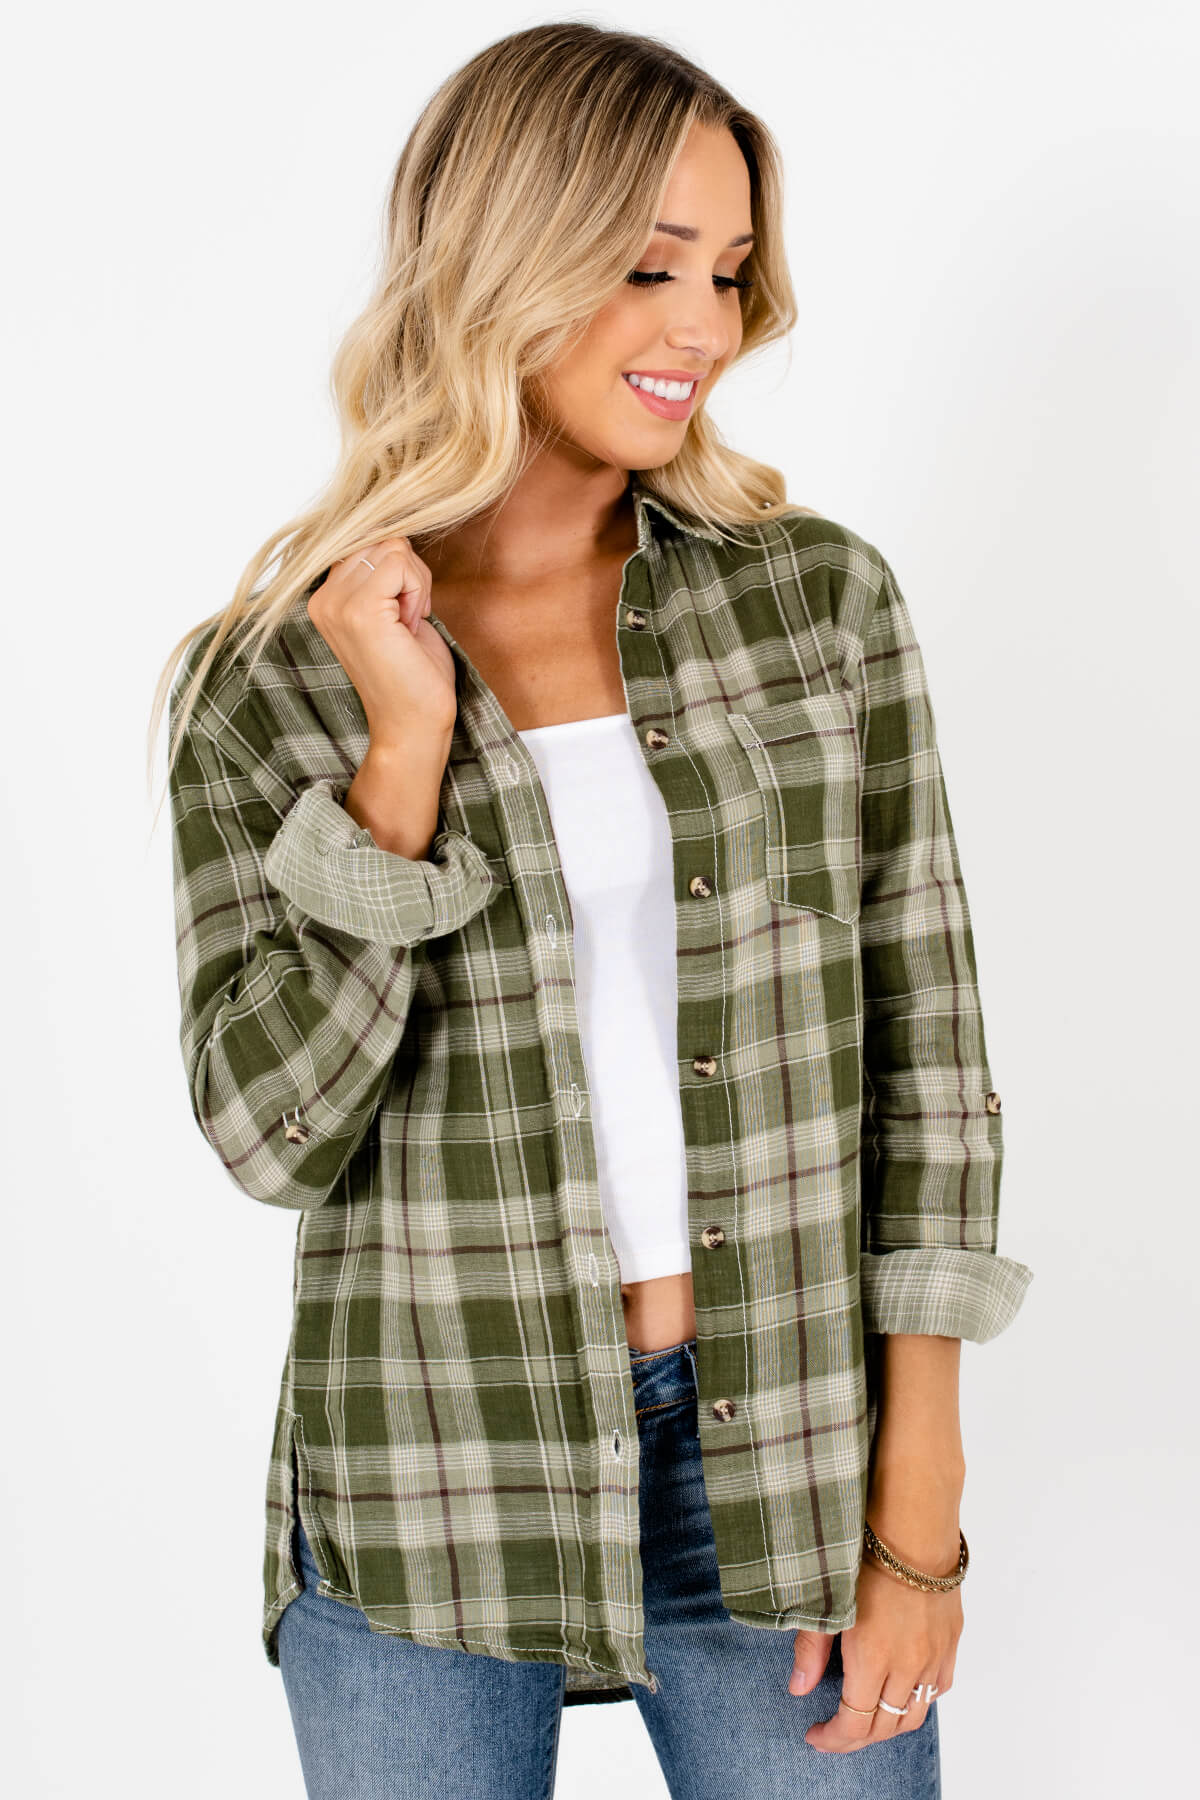 Never A Dull Moment Green Plaid Top | Boutique Tops for Women - Bella ...